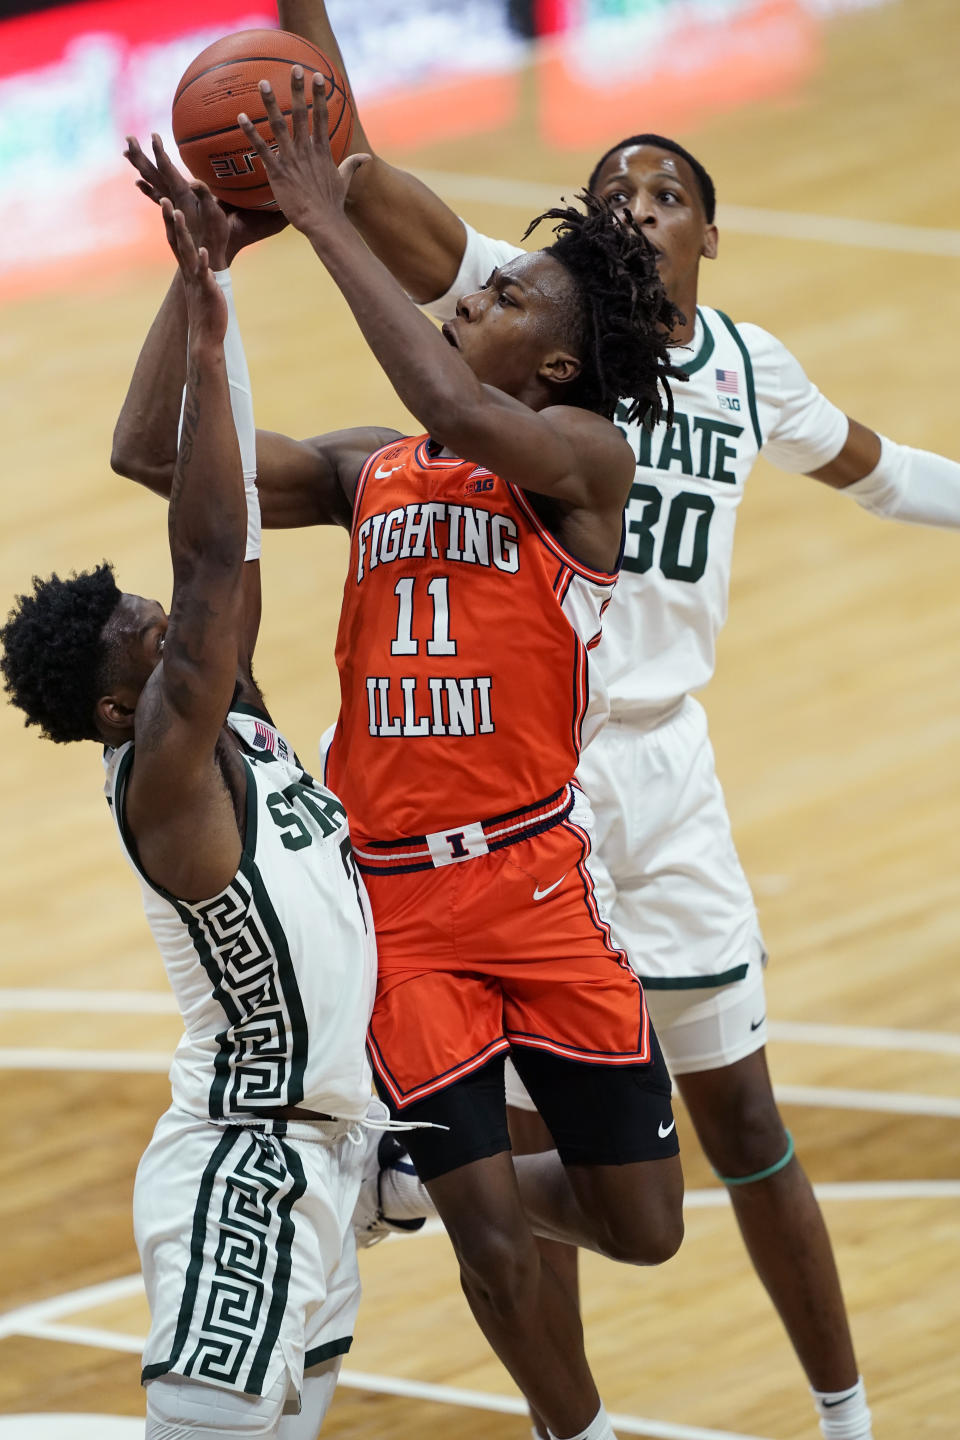 Illinois guard Ayo Dosunmu (11) shoots over the defense of Michigan State guard Rocket Watts (2) and forward Marcus Bingham Jr. (30) during the first half of an NCAA college basketball game, Tuesday, Feb. 23, 2021, in East Lansing, Mich. (AP Photo/Carlos Osorio)